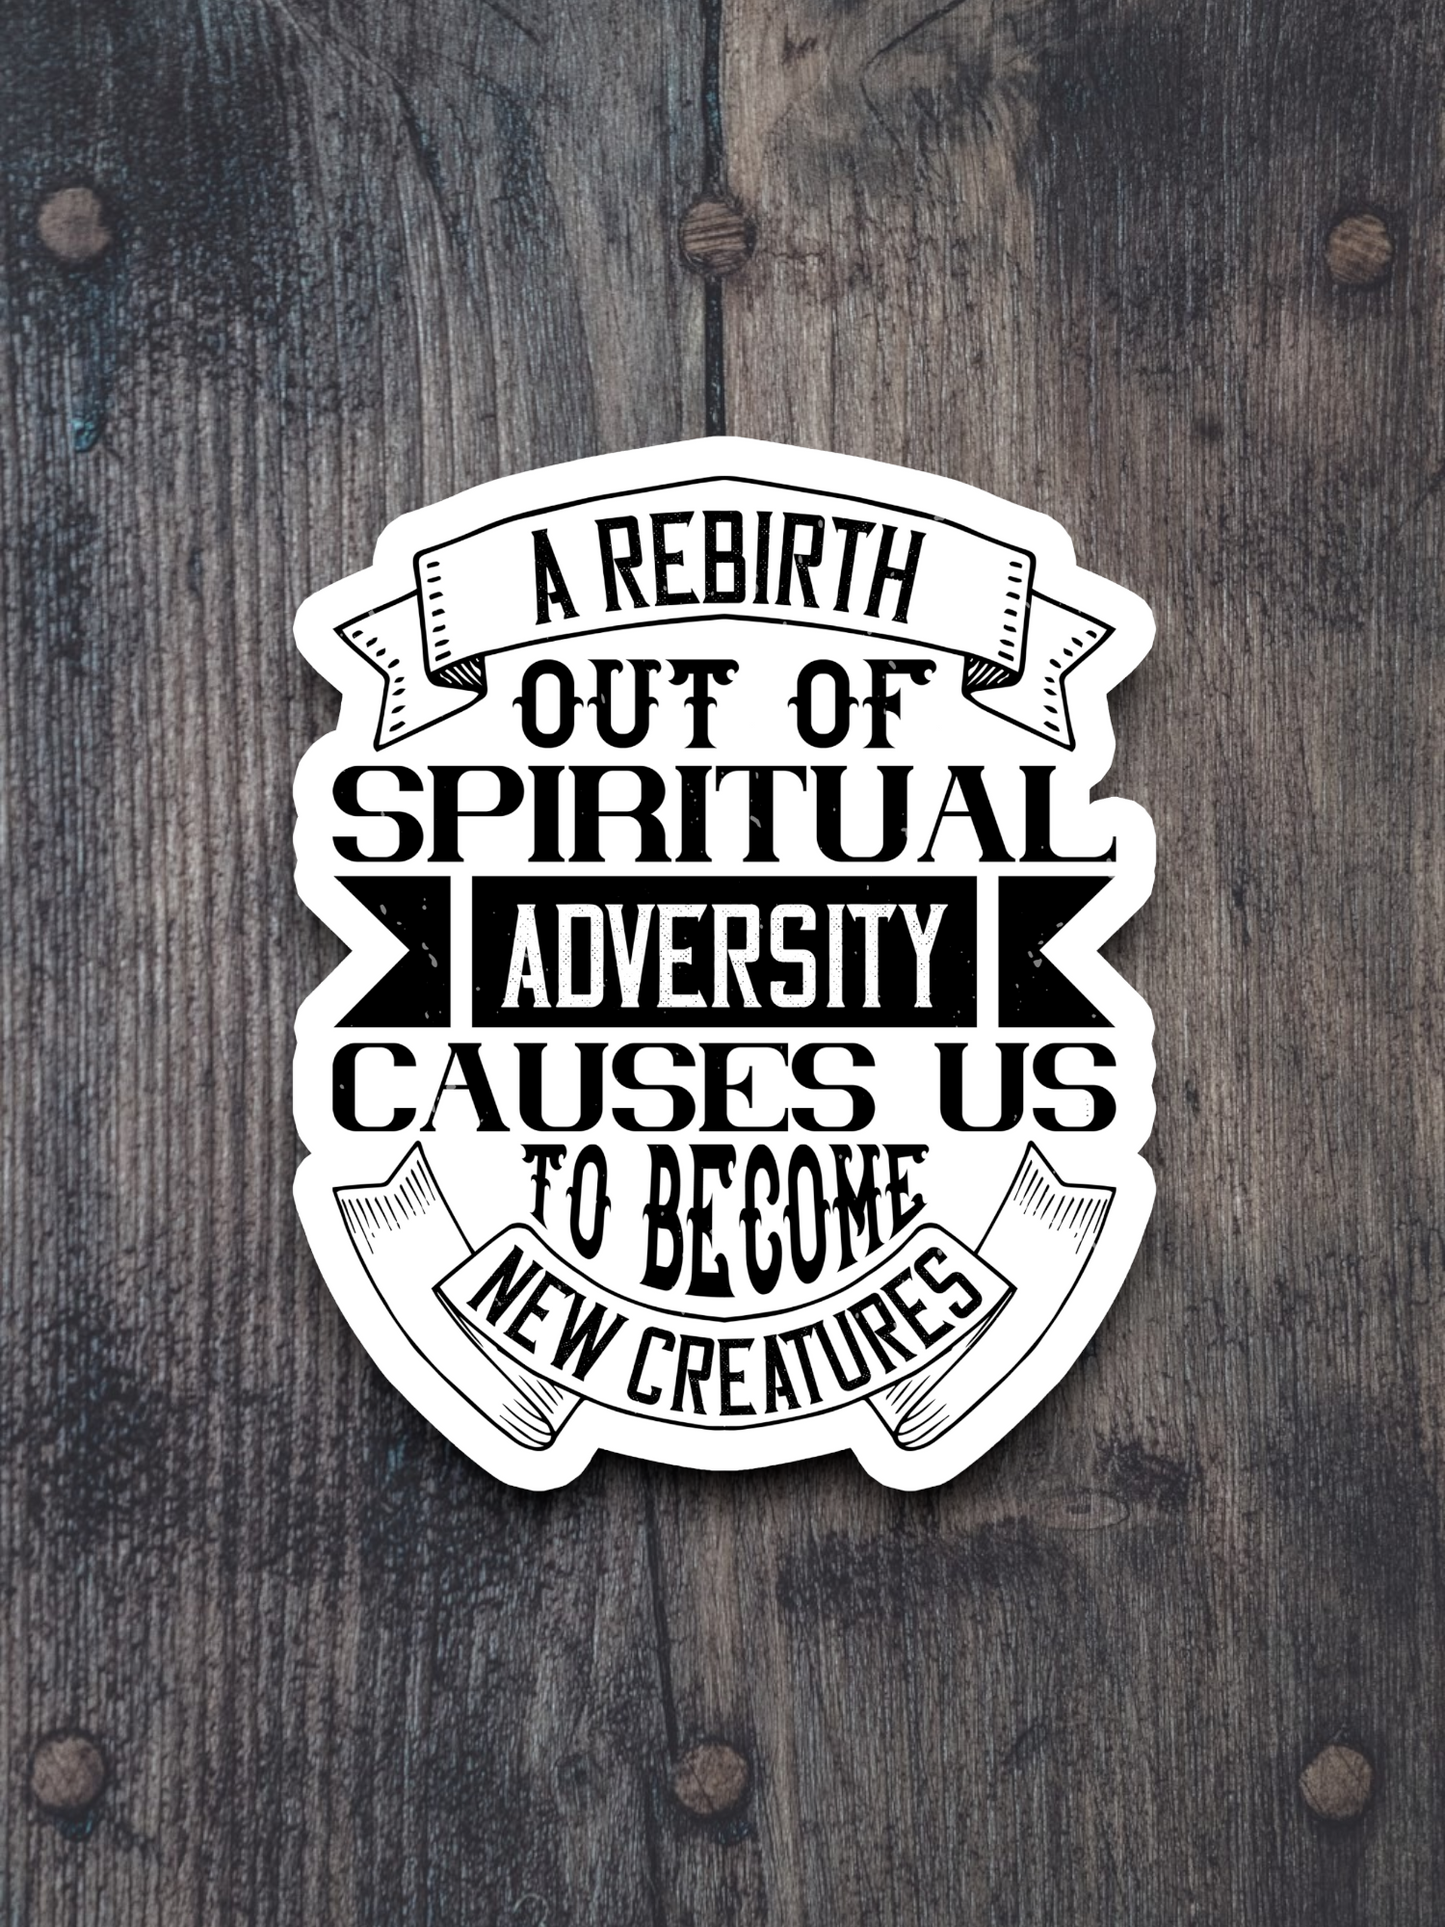 A Rebirth Out Of Spiritual Adversity Causes - Faith Sticker